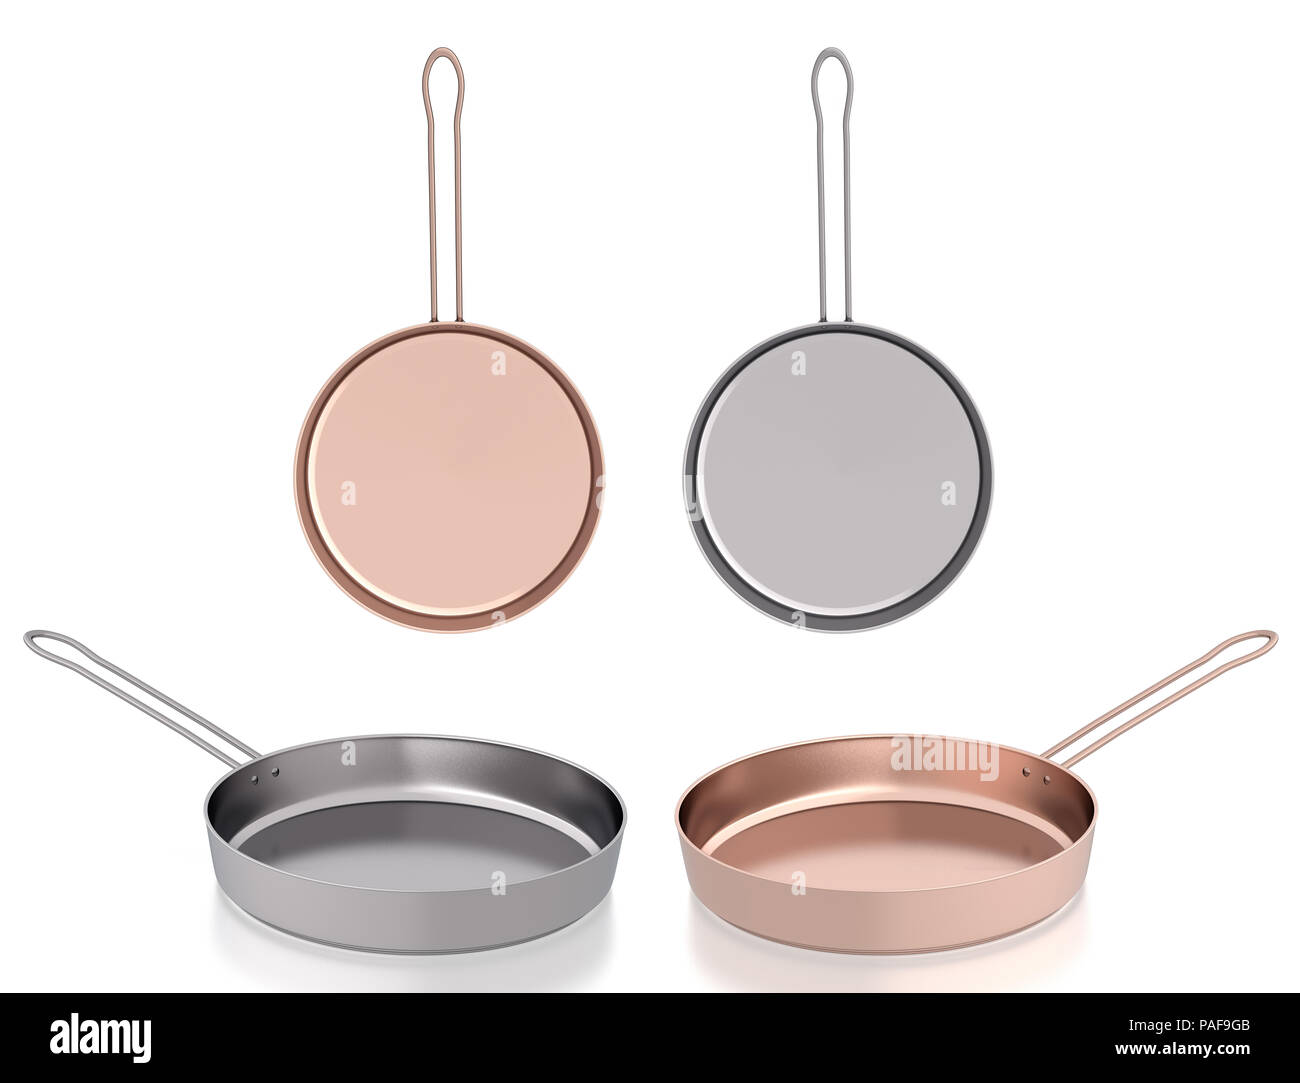 https://c8.alamy.com/comp/PAF9GB/steel-and-copper-frying-pans-set-isolated-on-white-side-view-and-view-above-PAF9GB.jpg